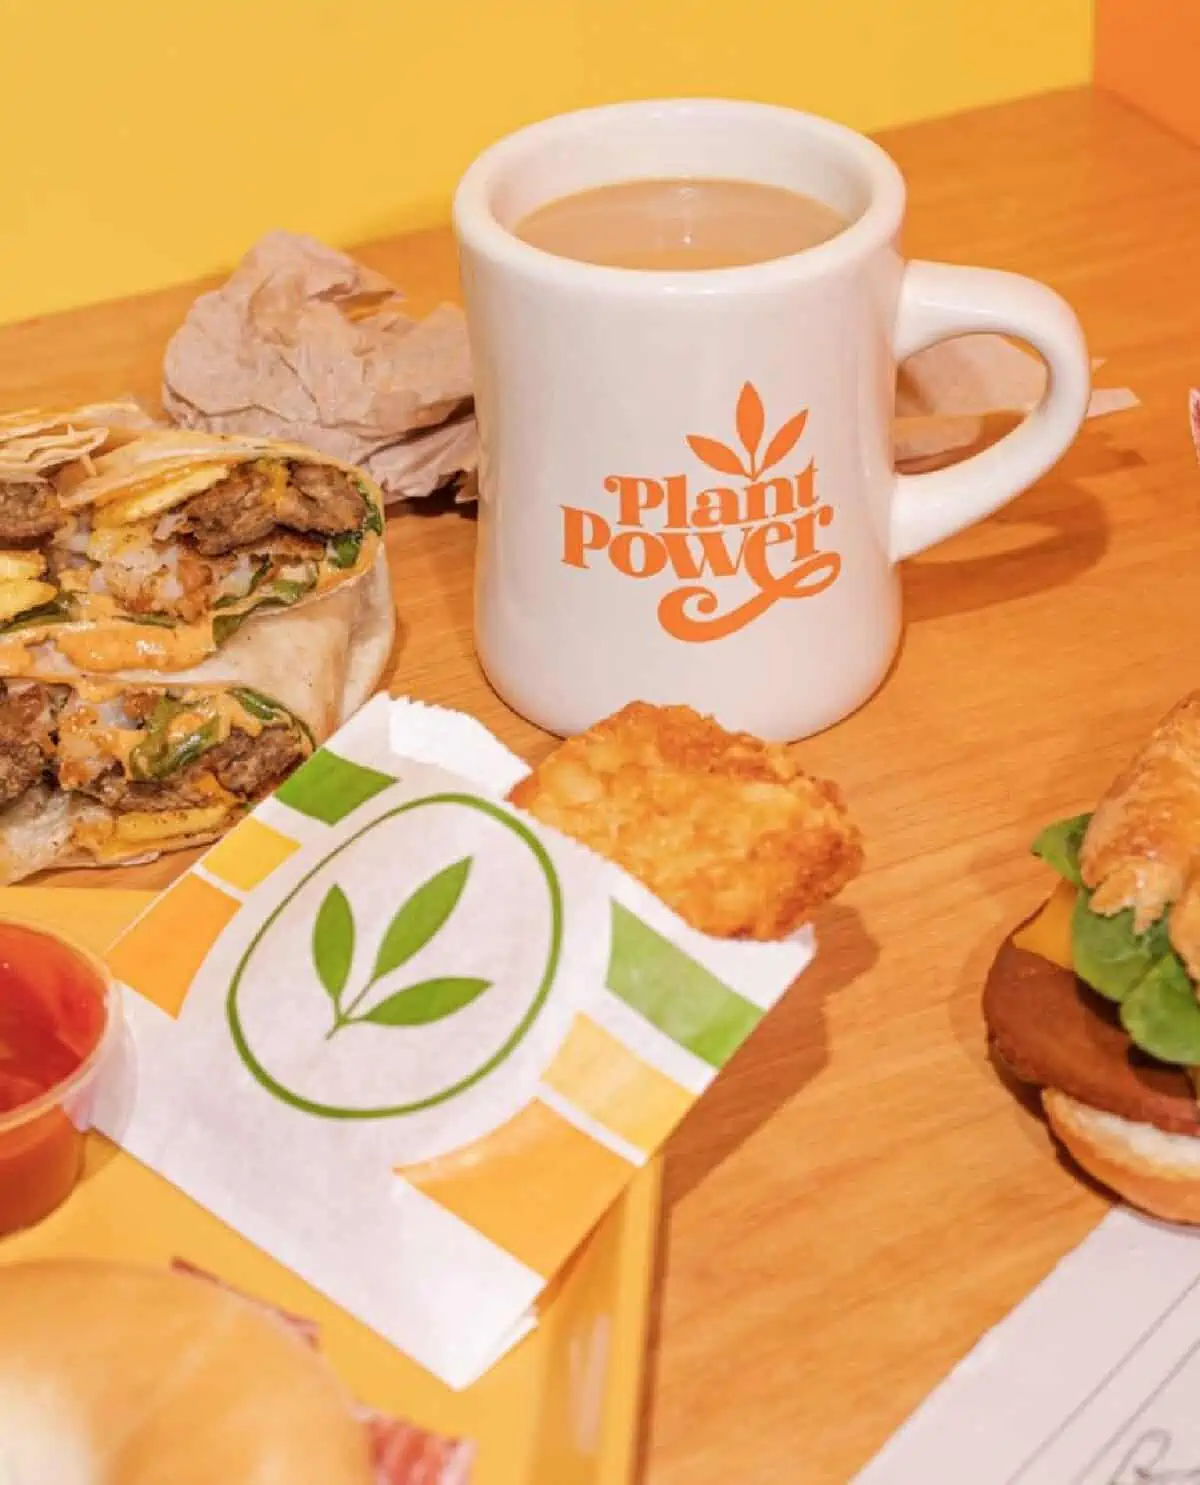 Plant-Based breakfast wraps, croissants, and a hash brown patty in a paper sleeve laying on a wooden countertop along with a vintage style white coffee mug full of coffee.